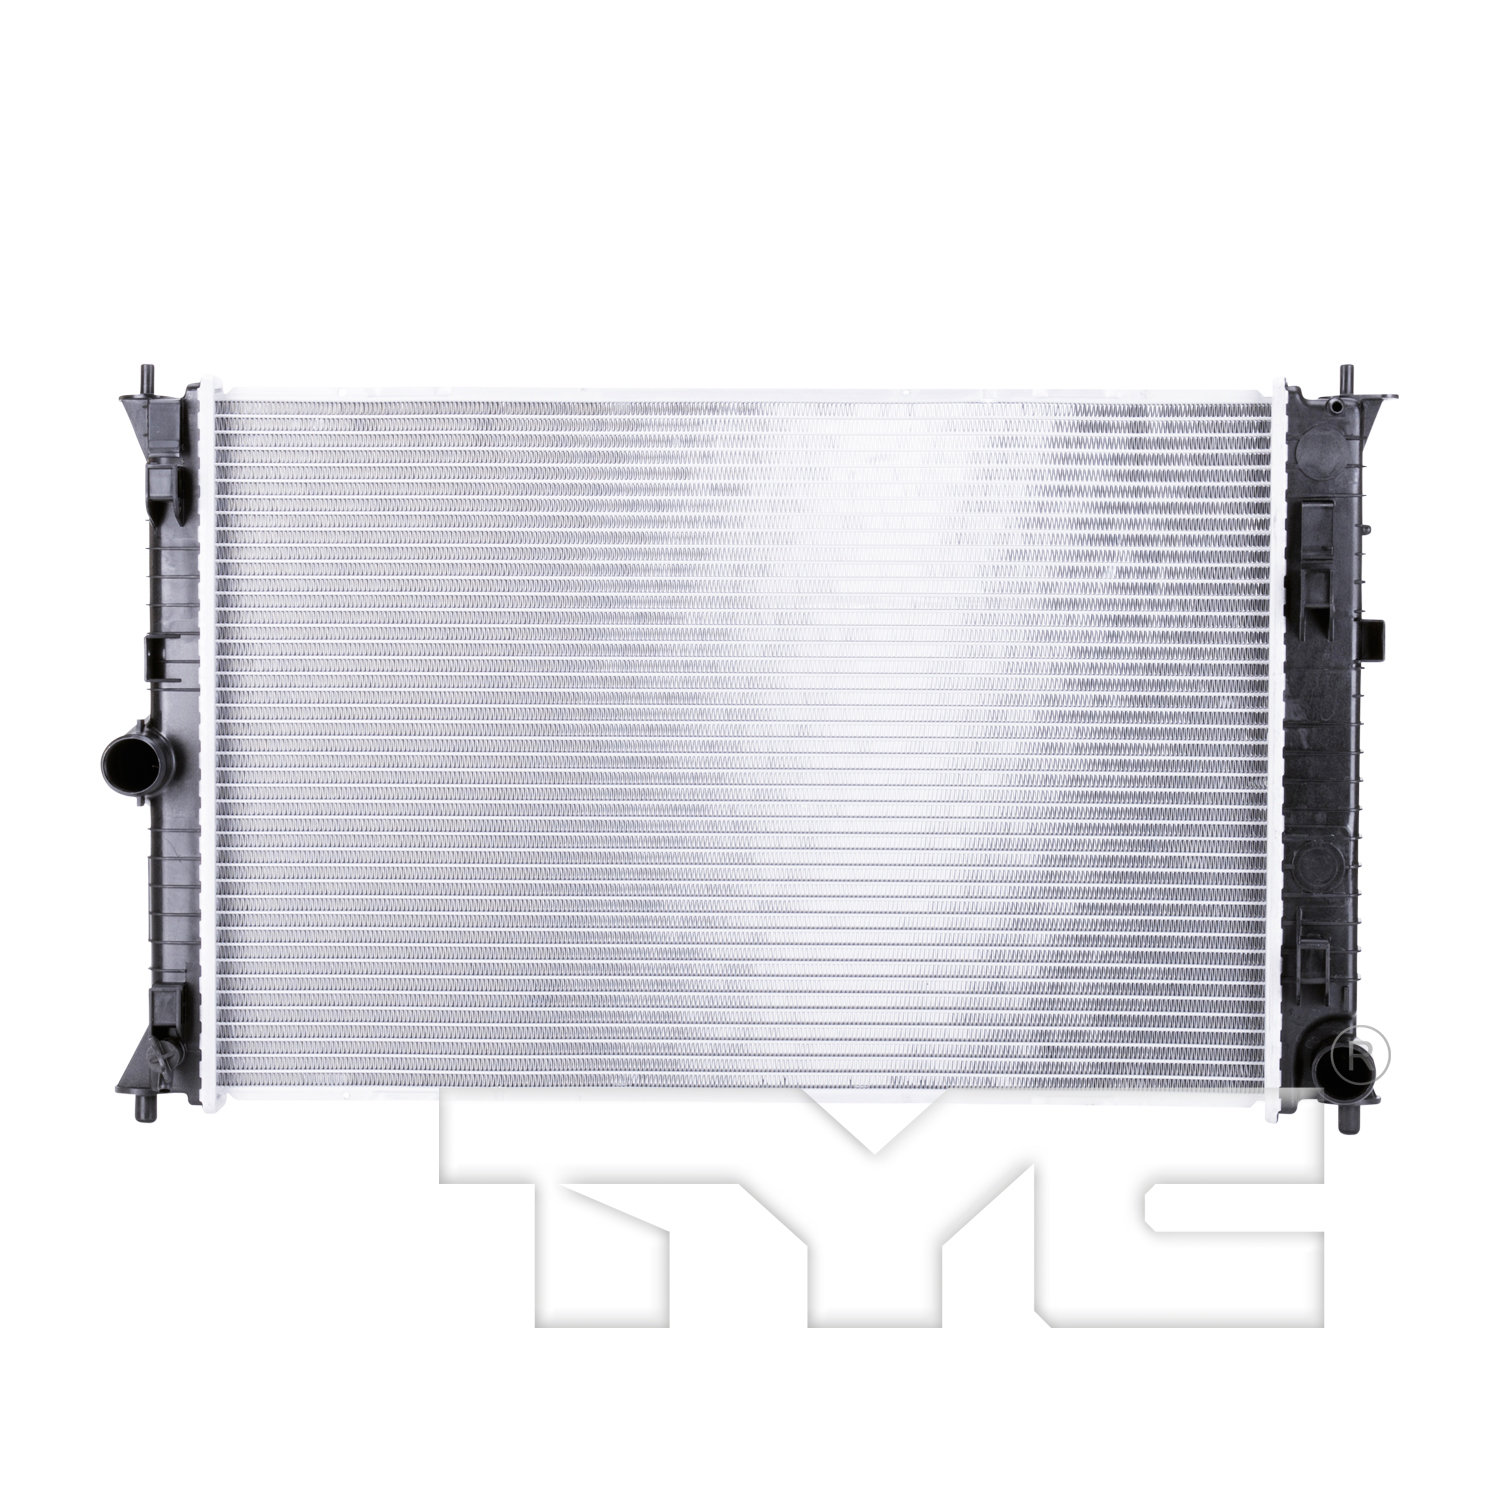 Aftermarket RADIATORS for FORD - FUSION, FUSION,10-12,Radiator assembly